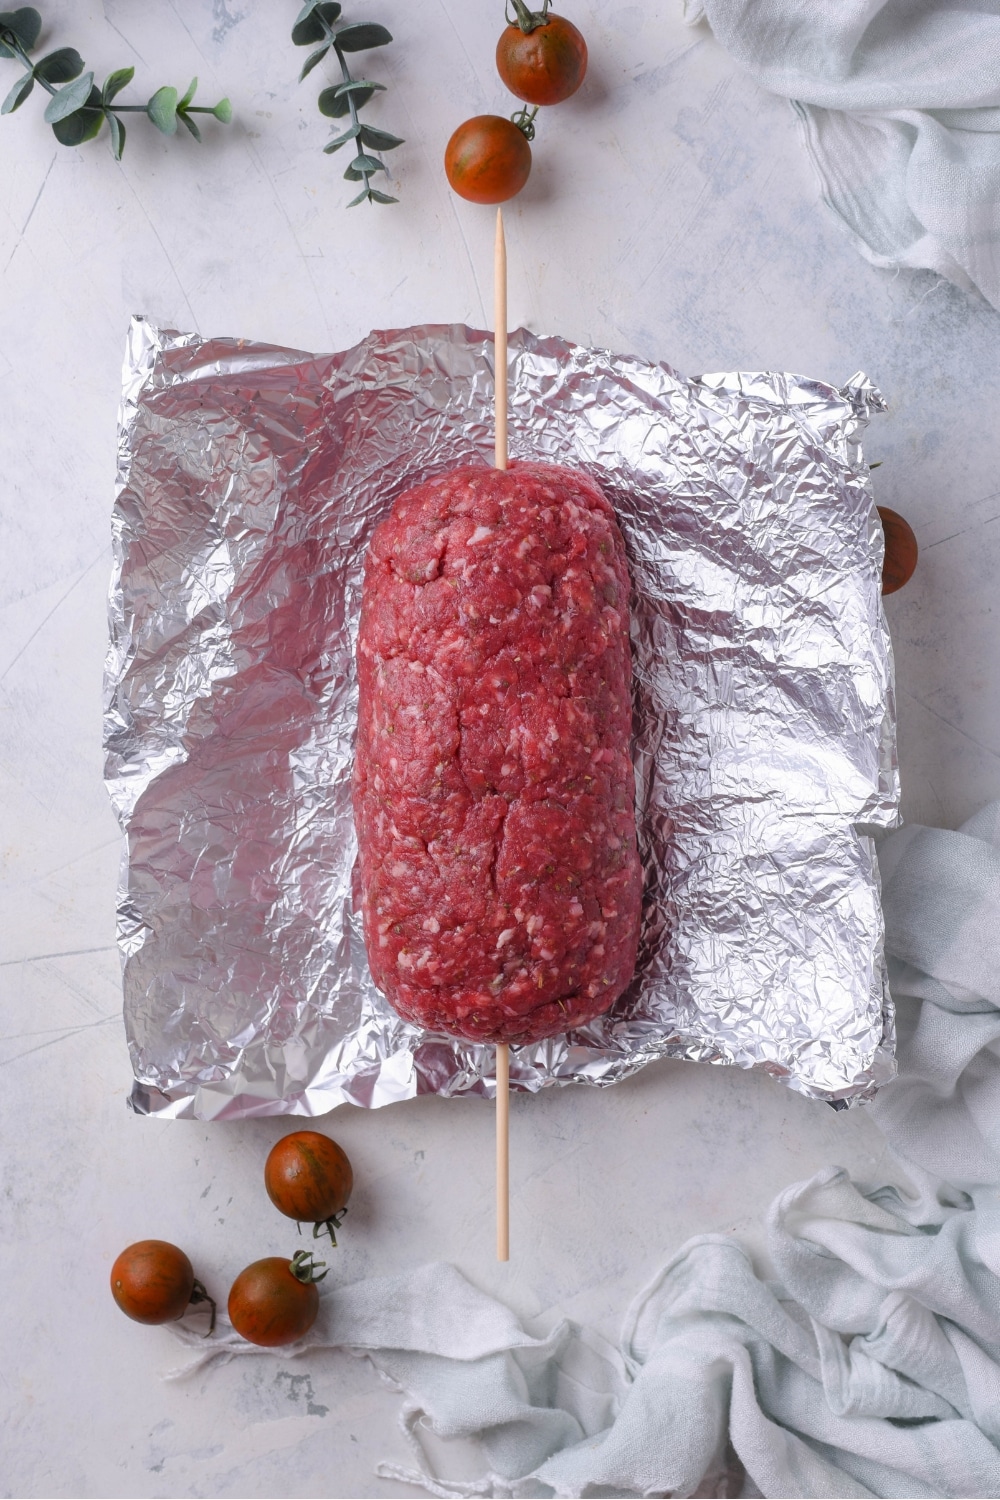 A log of raw ground beef atop foil with a skewer down the center.